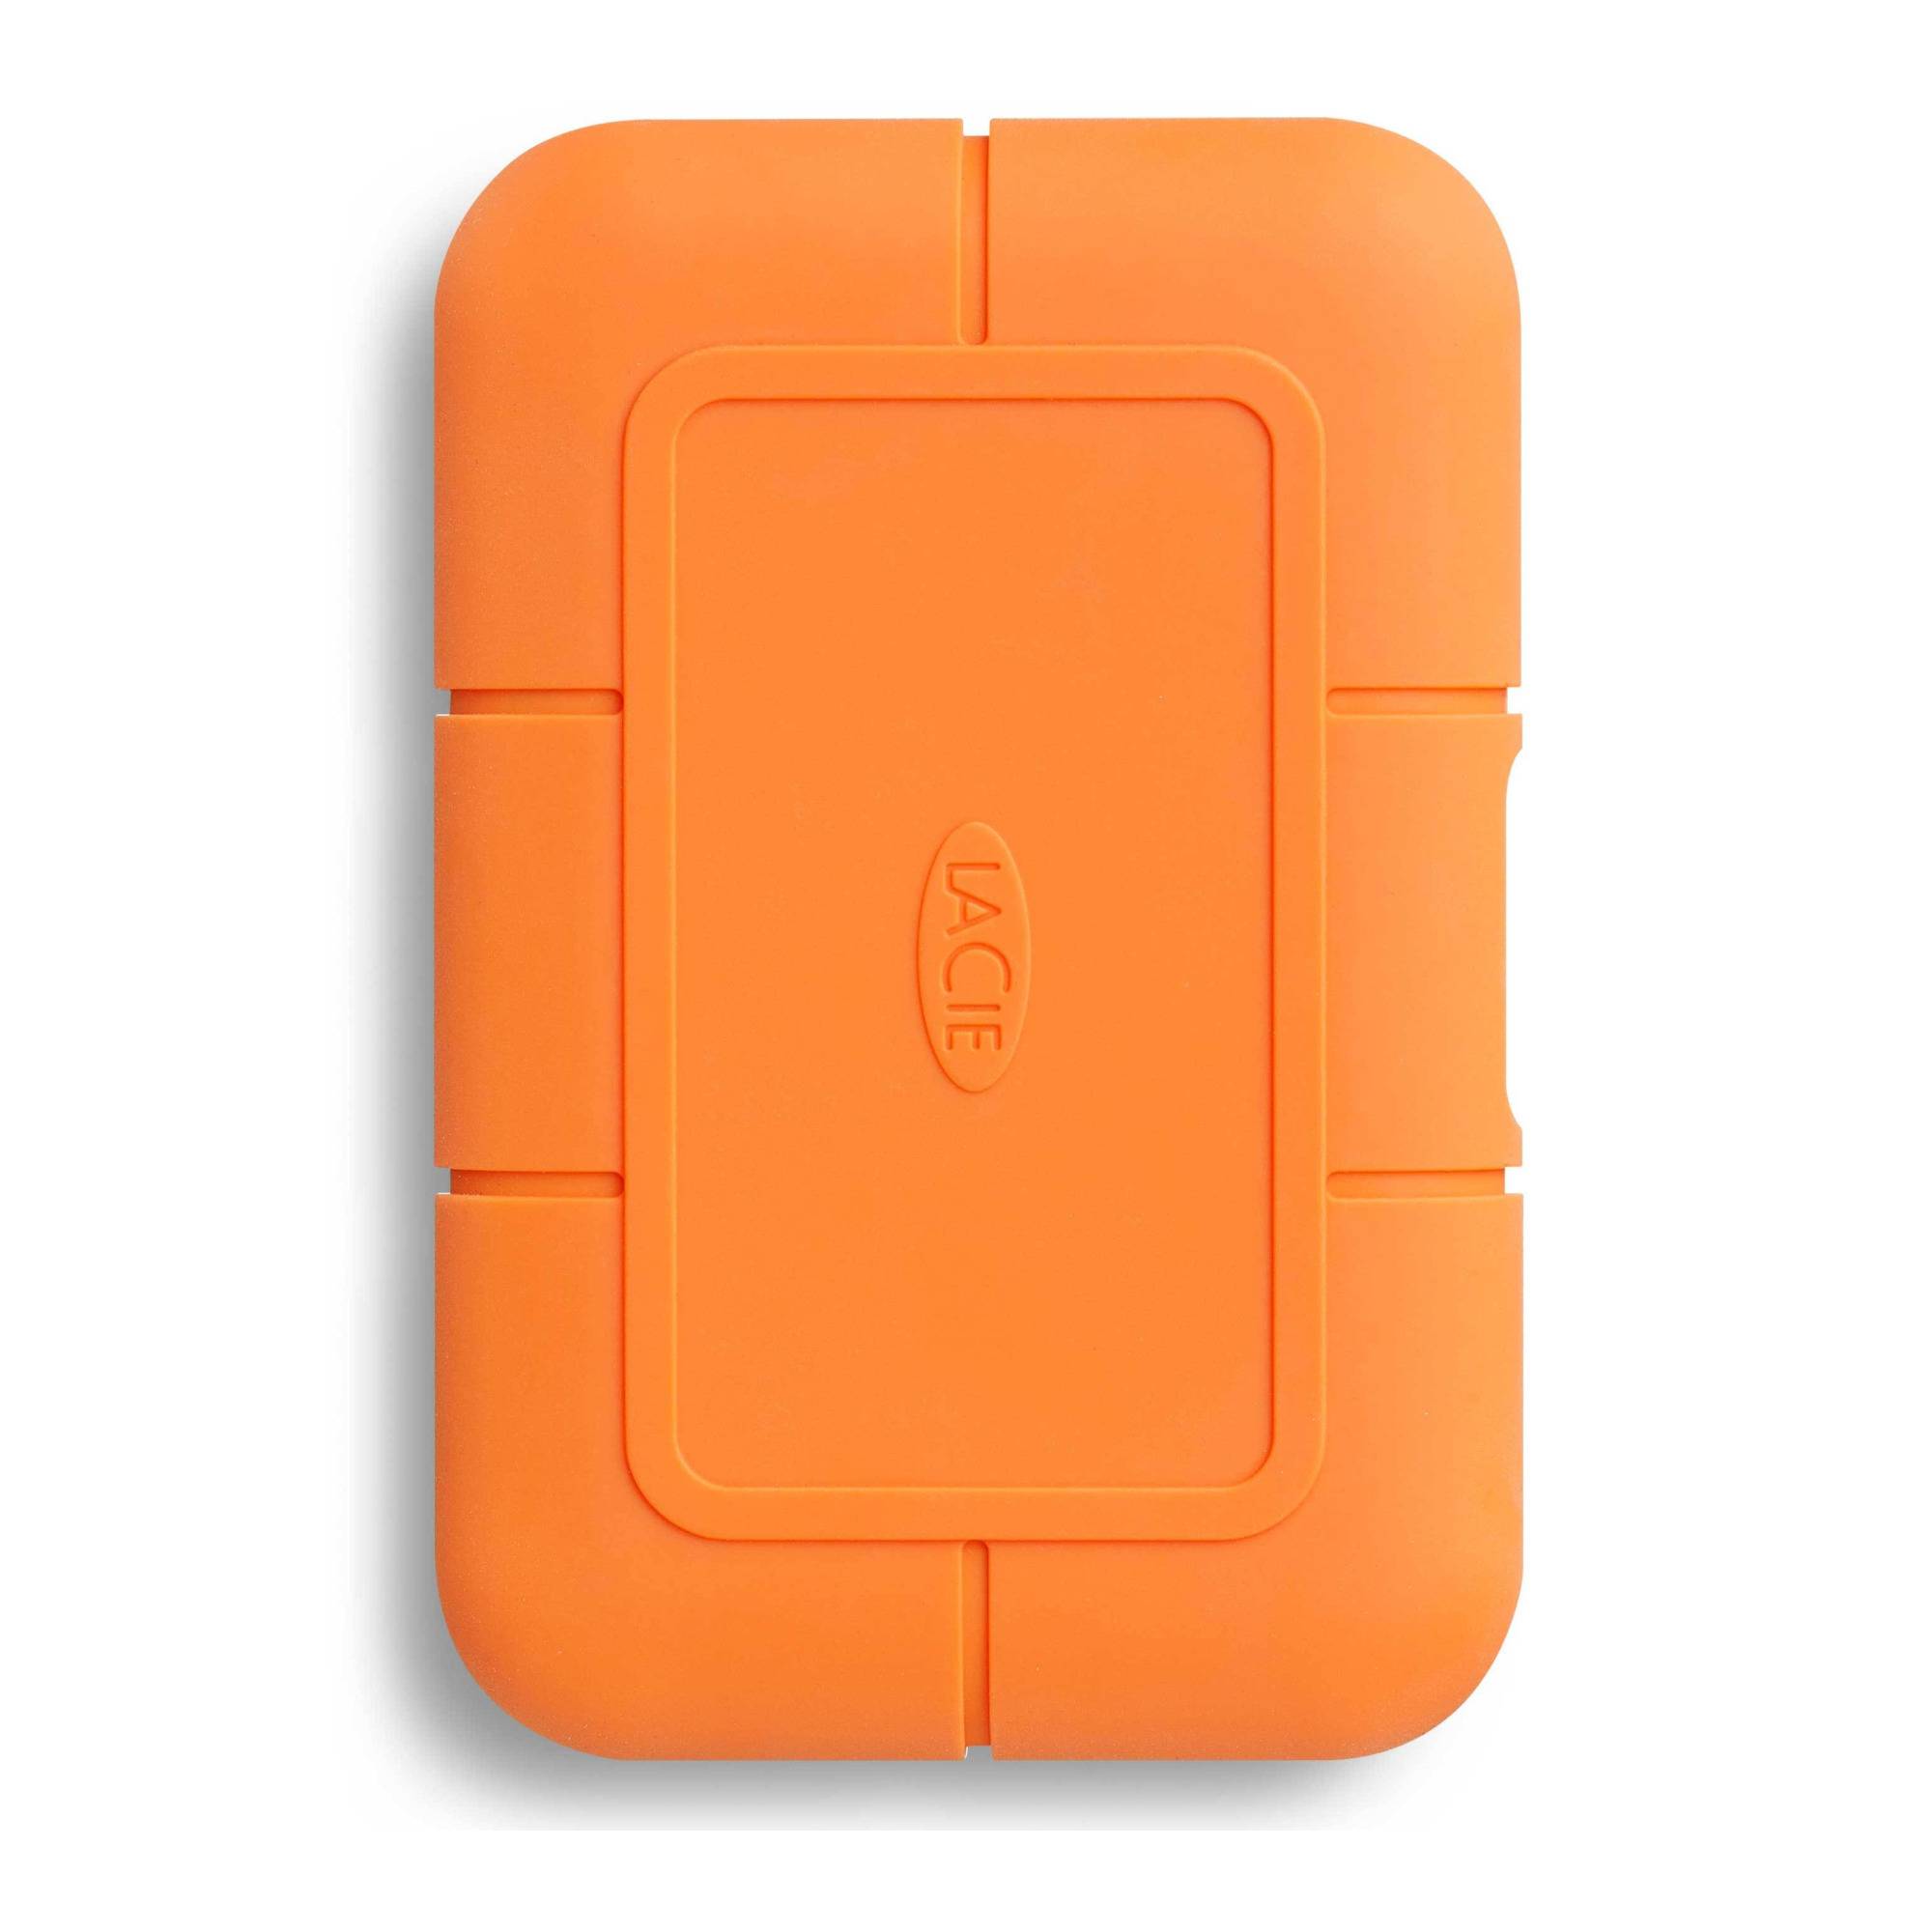 LaCie Rugged SSD 500GB Professional All-Terrain USB 3.1 Type-C External Solid State Drive